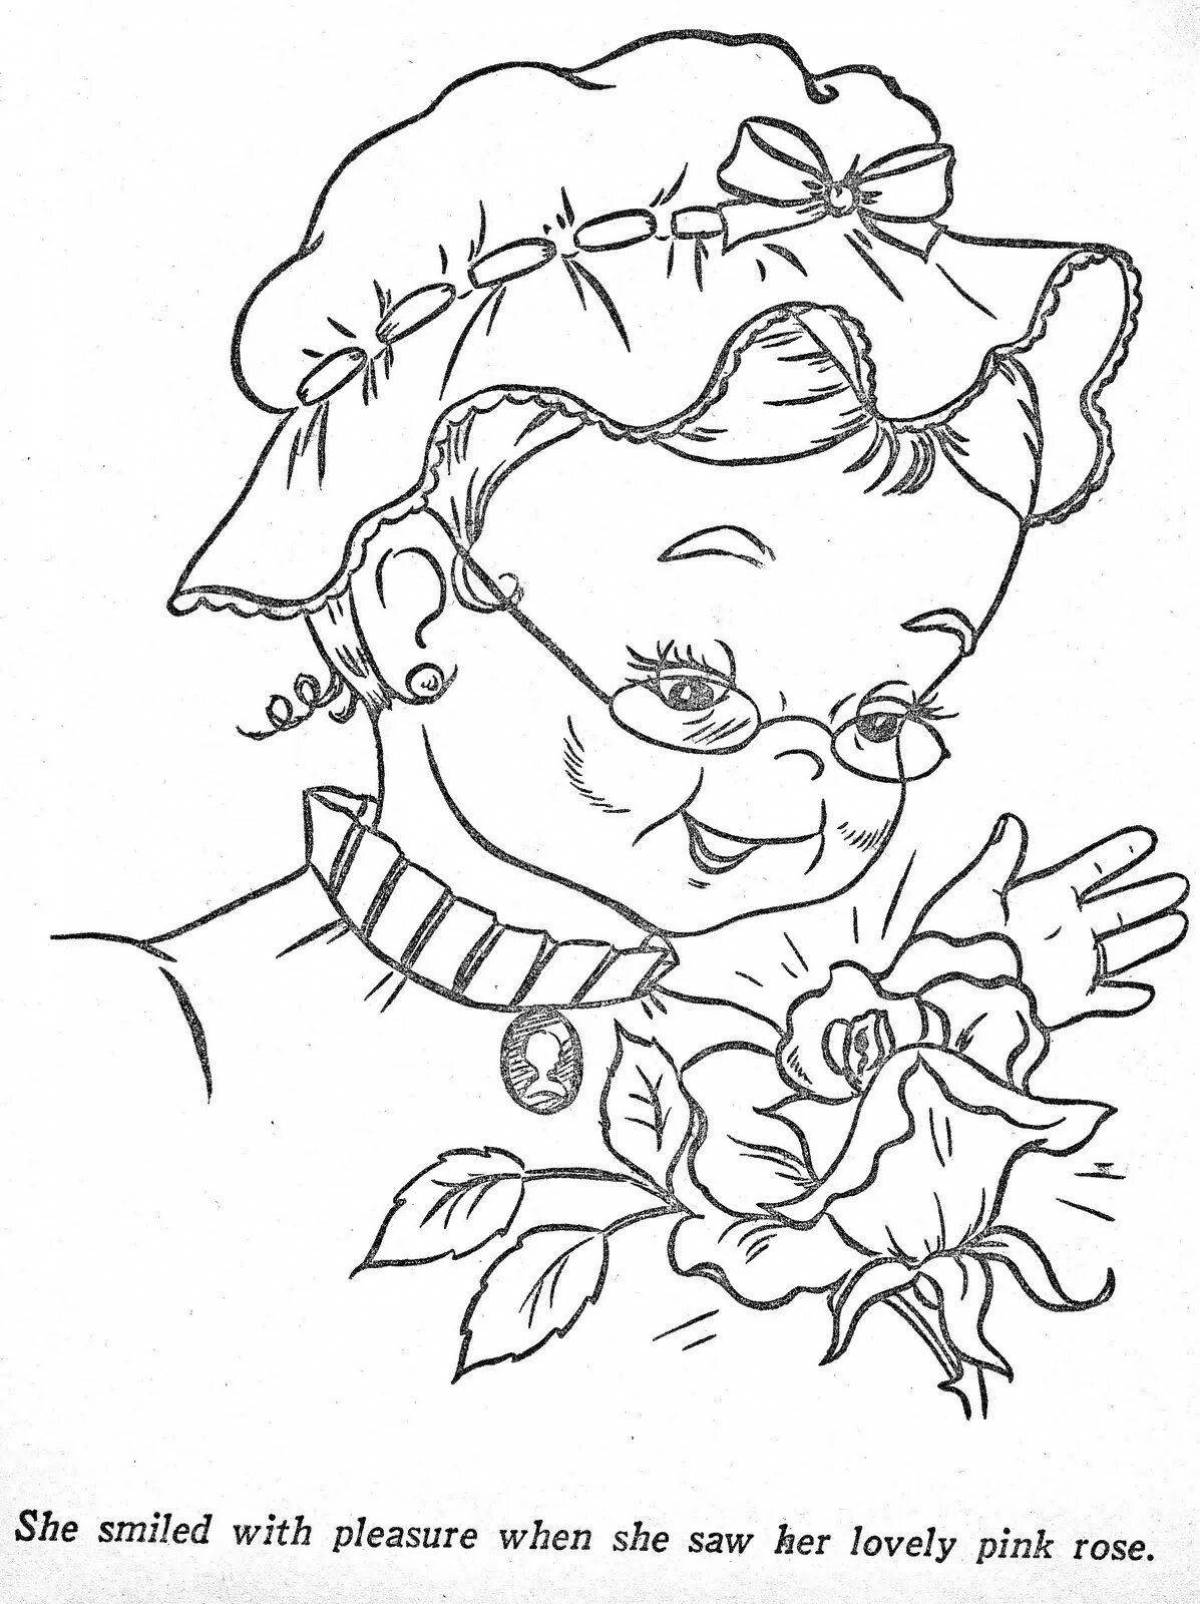 Cute grandmother portrait coloring page